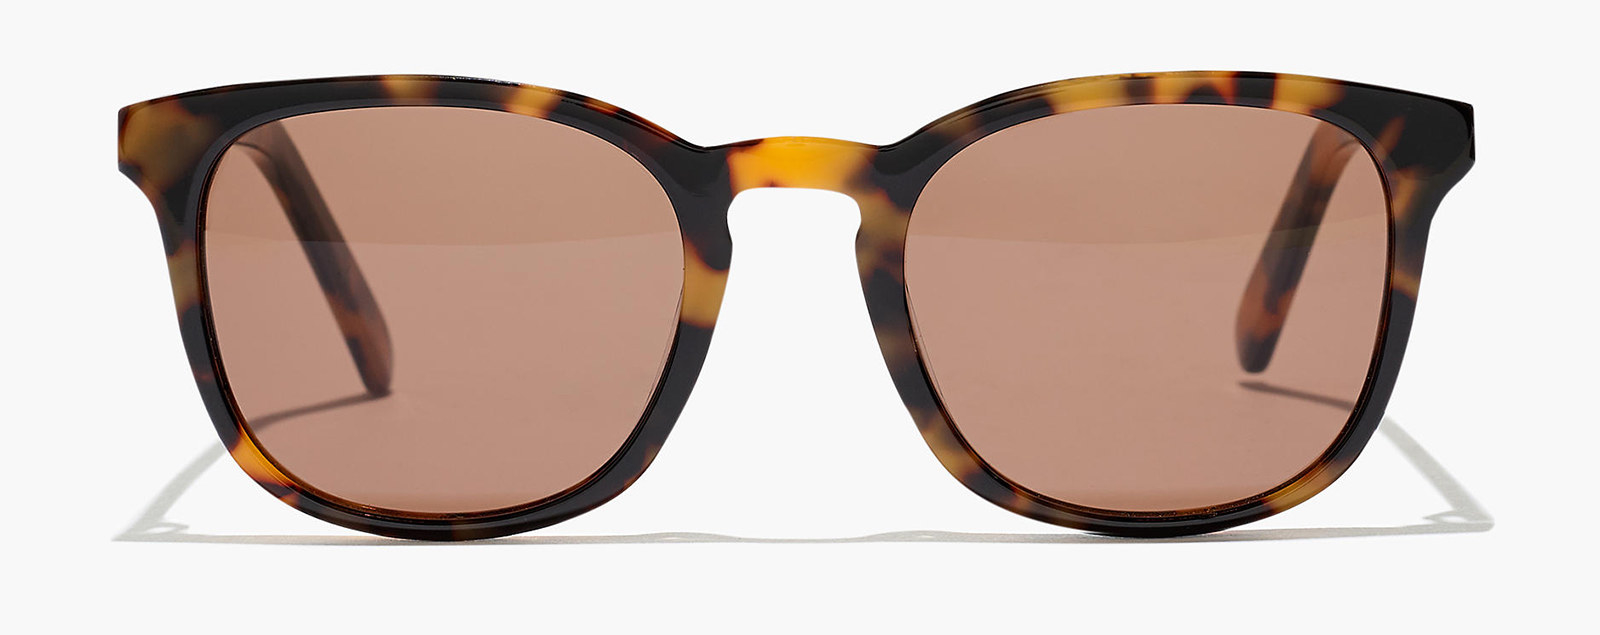 An image of Madewell Ashcroft sunglasses